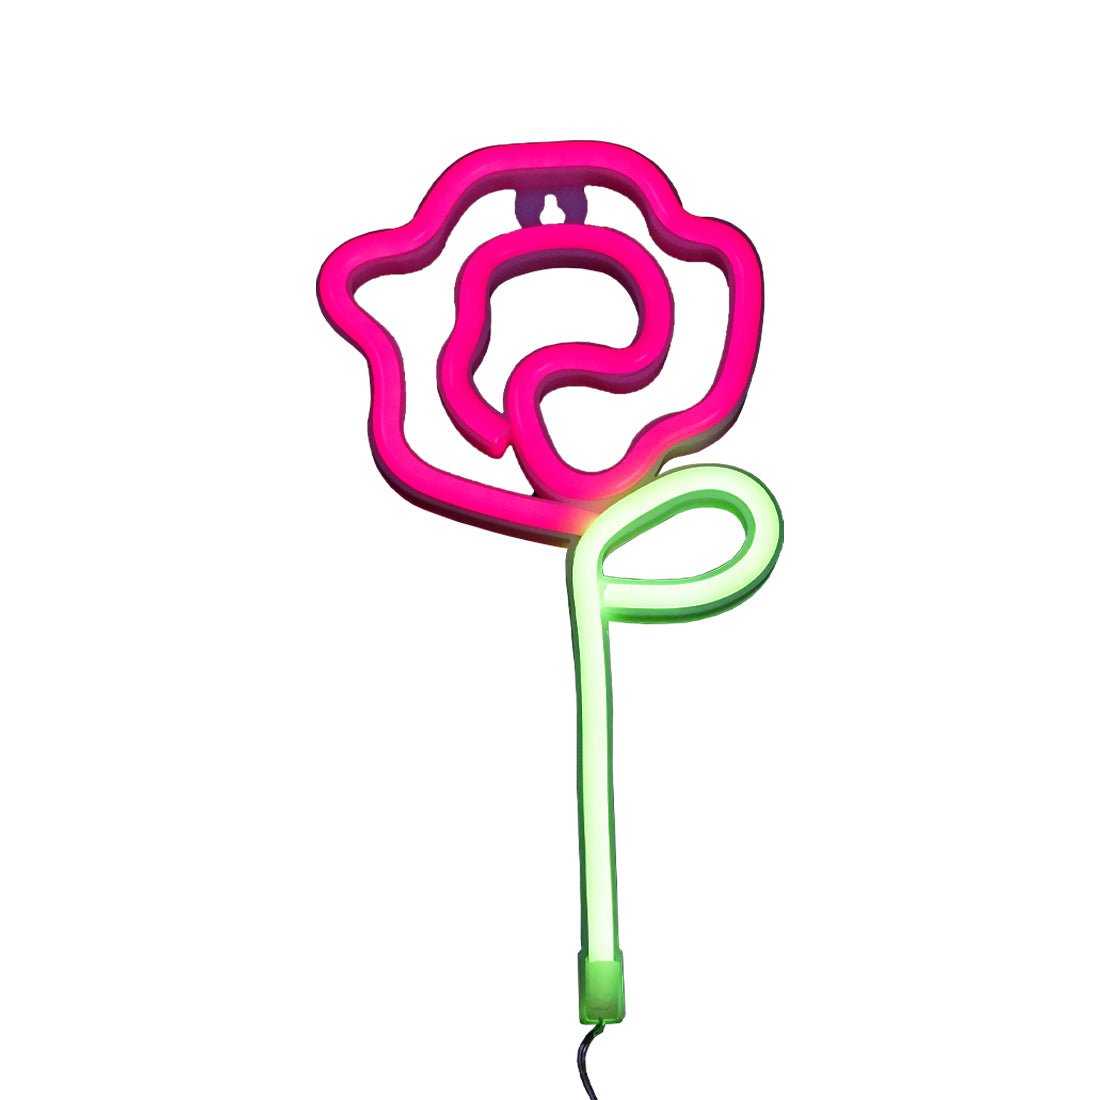 Led Neon Rose Shape - Red & Green - إضاءة - Store 974 | ستور ٩٧٤